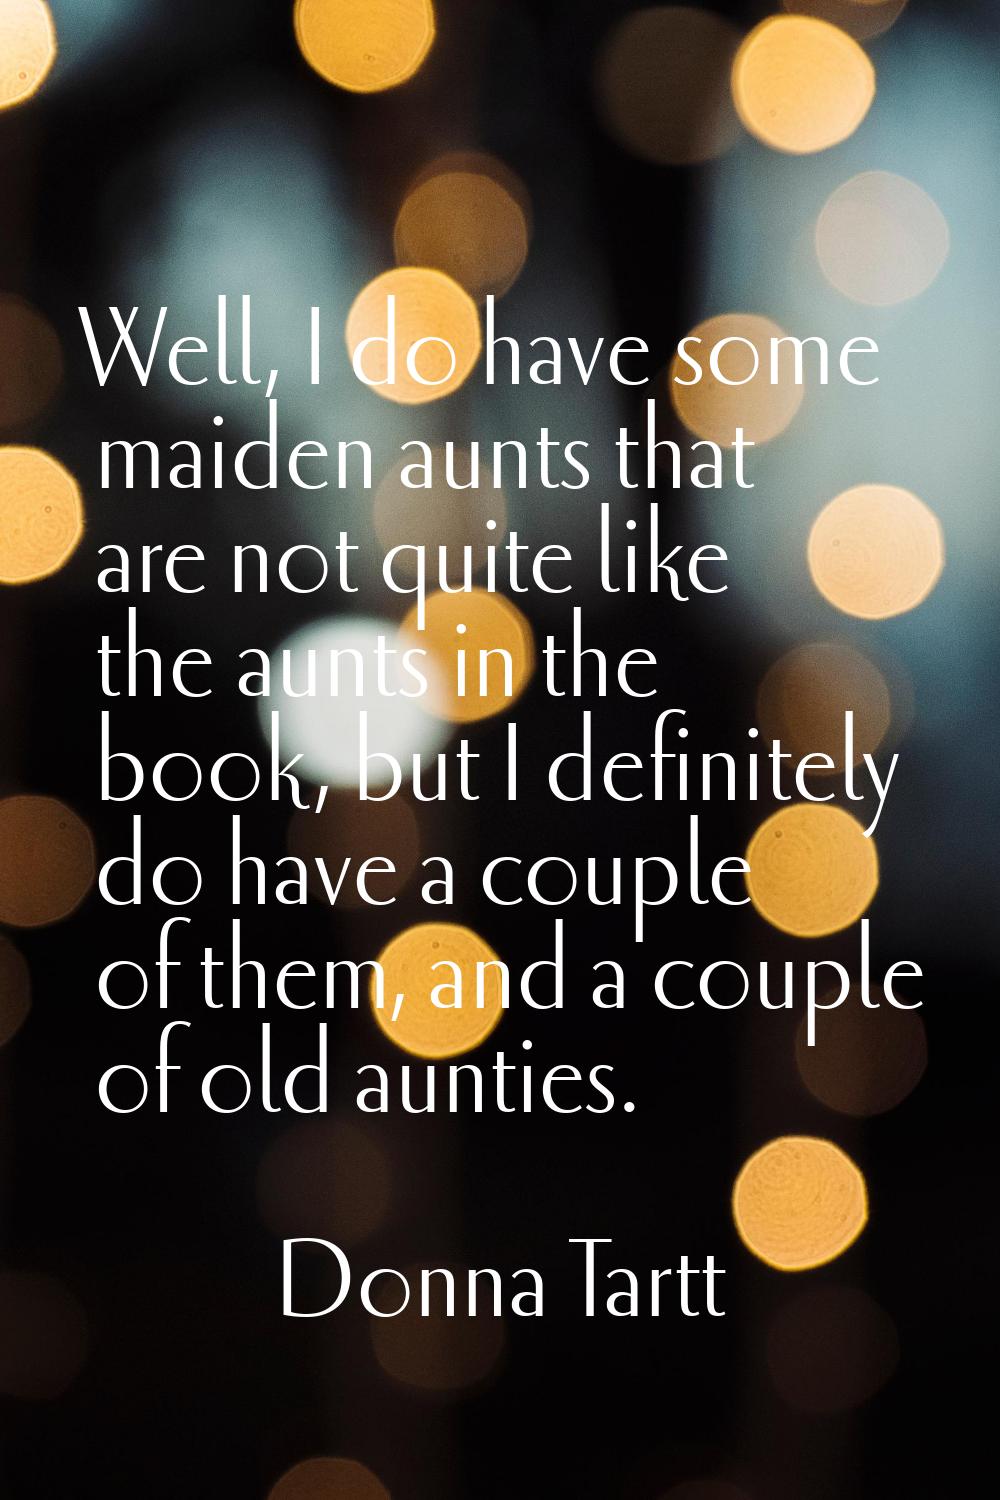 Well, I do have some maiden aunts that are not quite like the aunts in the book, but I definitely d